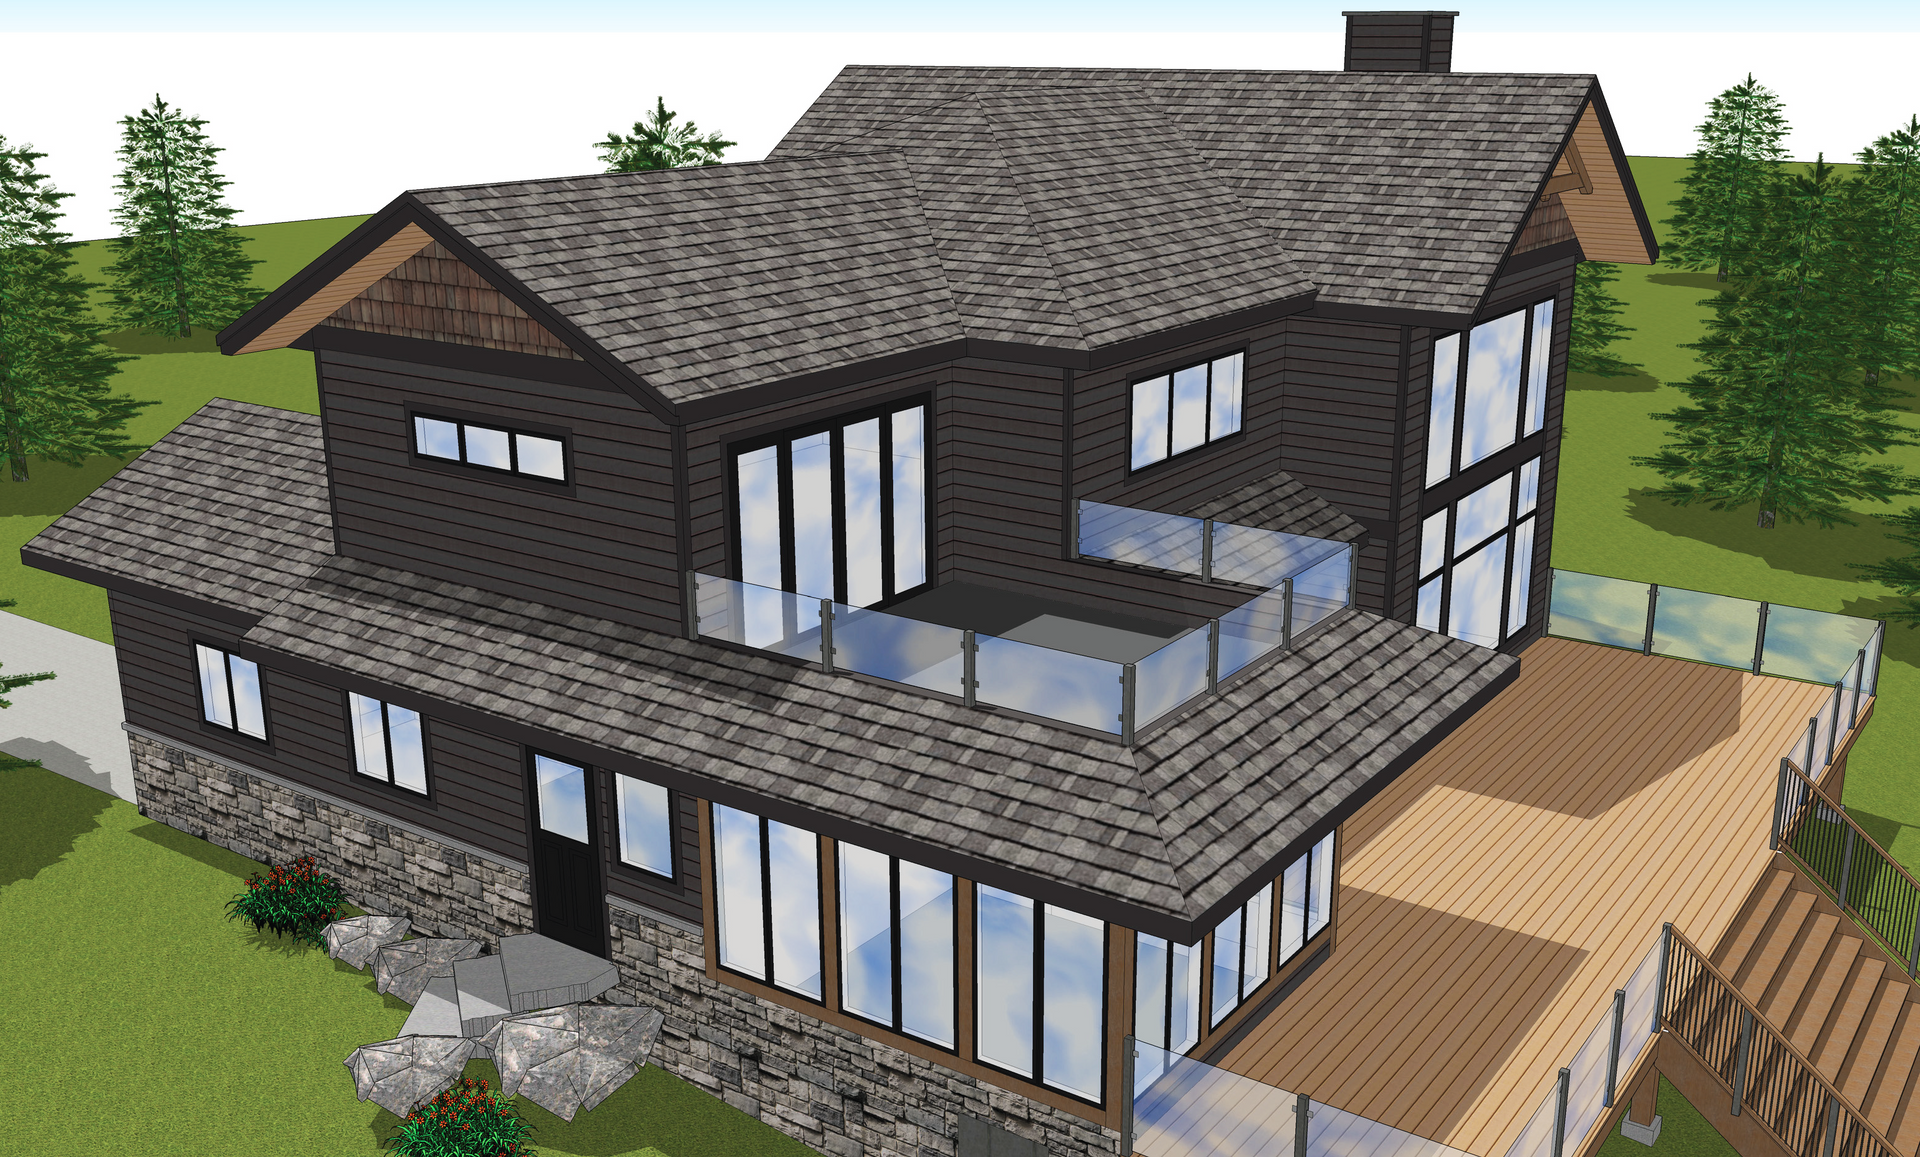 Architectural rendering of a cottage as part of a comprehensive design process.